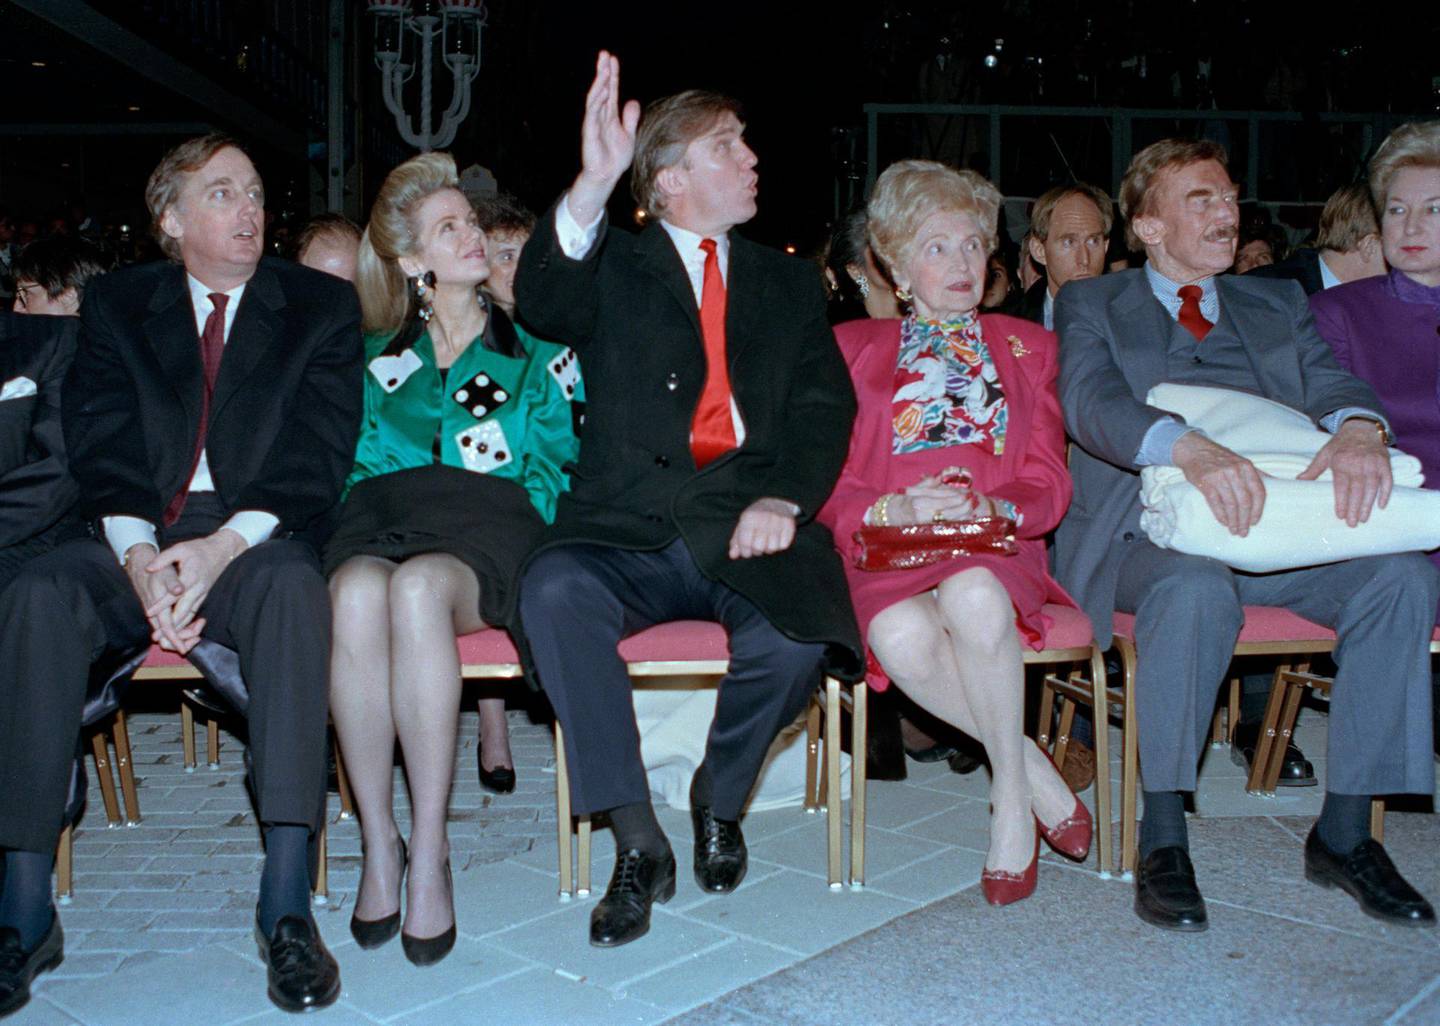 Donald Trump and family in the 90's. Left to right: late brother Robert Trump, former sister-in-law Blaine, Donald Trump, parents Mary and Fred, sister Marianne Trump Barry, retired U.S. federal judge.  APs